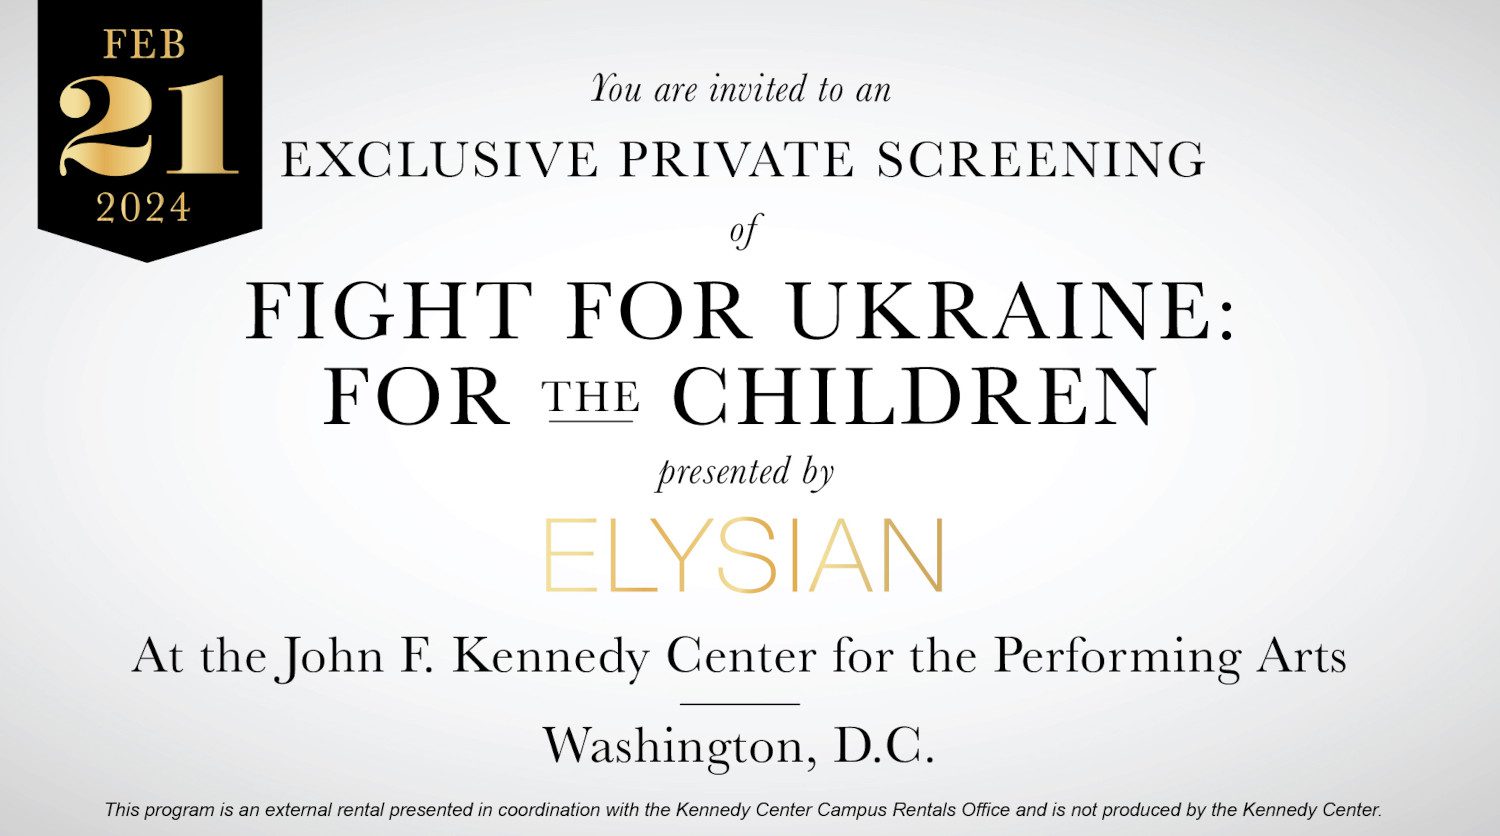 You are invited to an exclusive private sScreening of Fight For Ukraine: For the Children, presented by ELYSIAN at the John F. Kennedy Center for the PErforming Arts in Washington D.C.